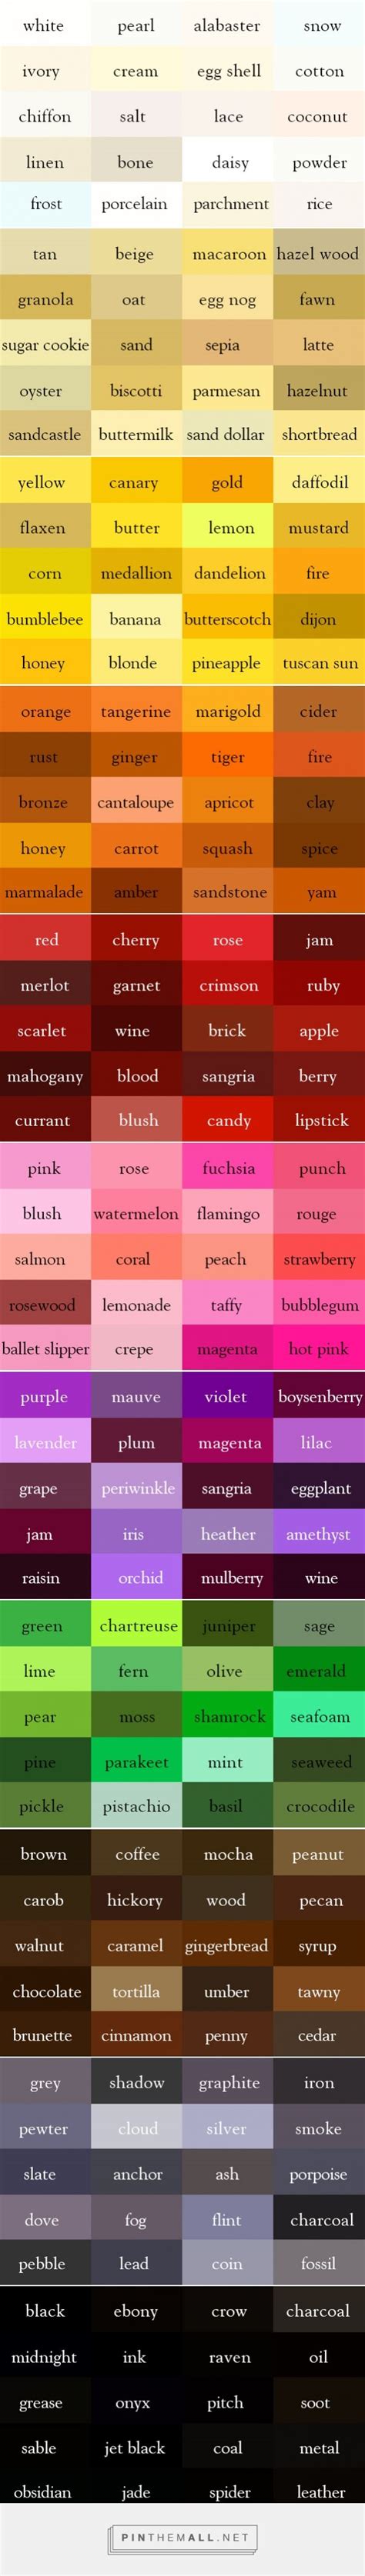 The Color Thesaurus Ingrid Sundberg A Grouped Images Picture